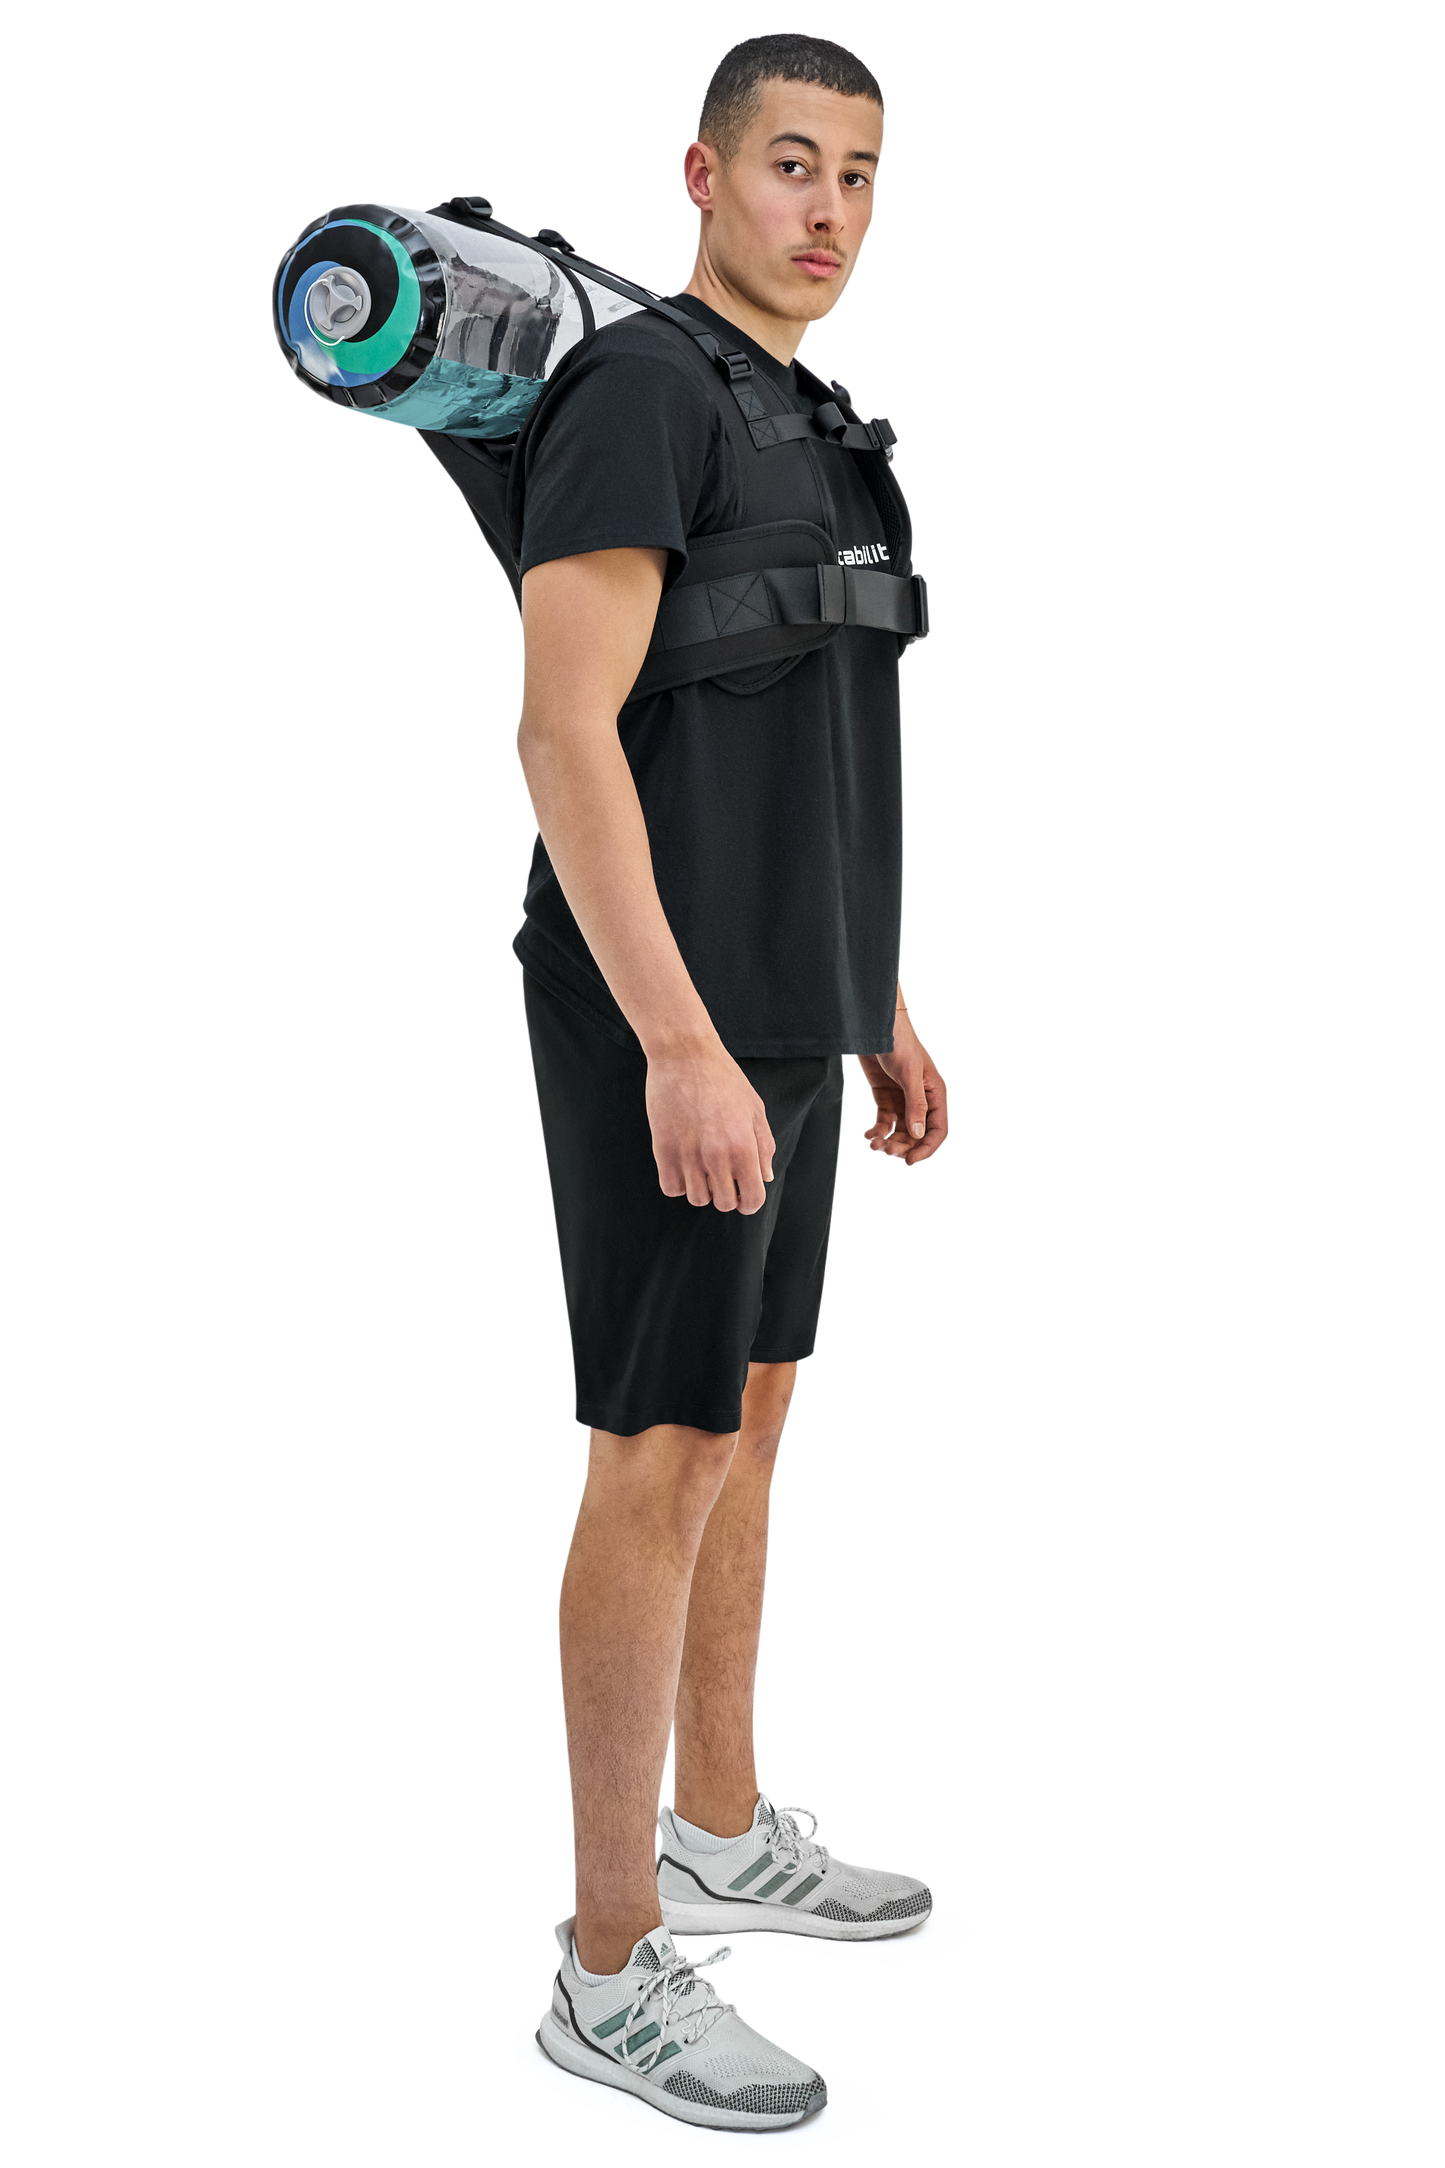 Hydrovest 2.0 - Now available!